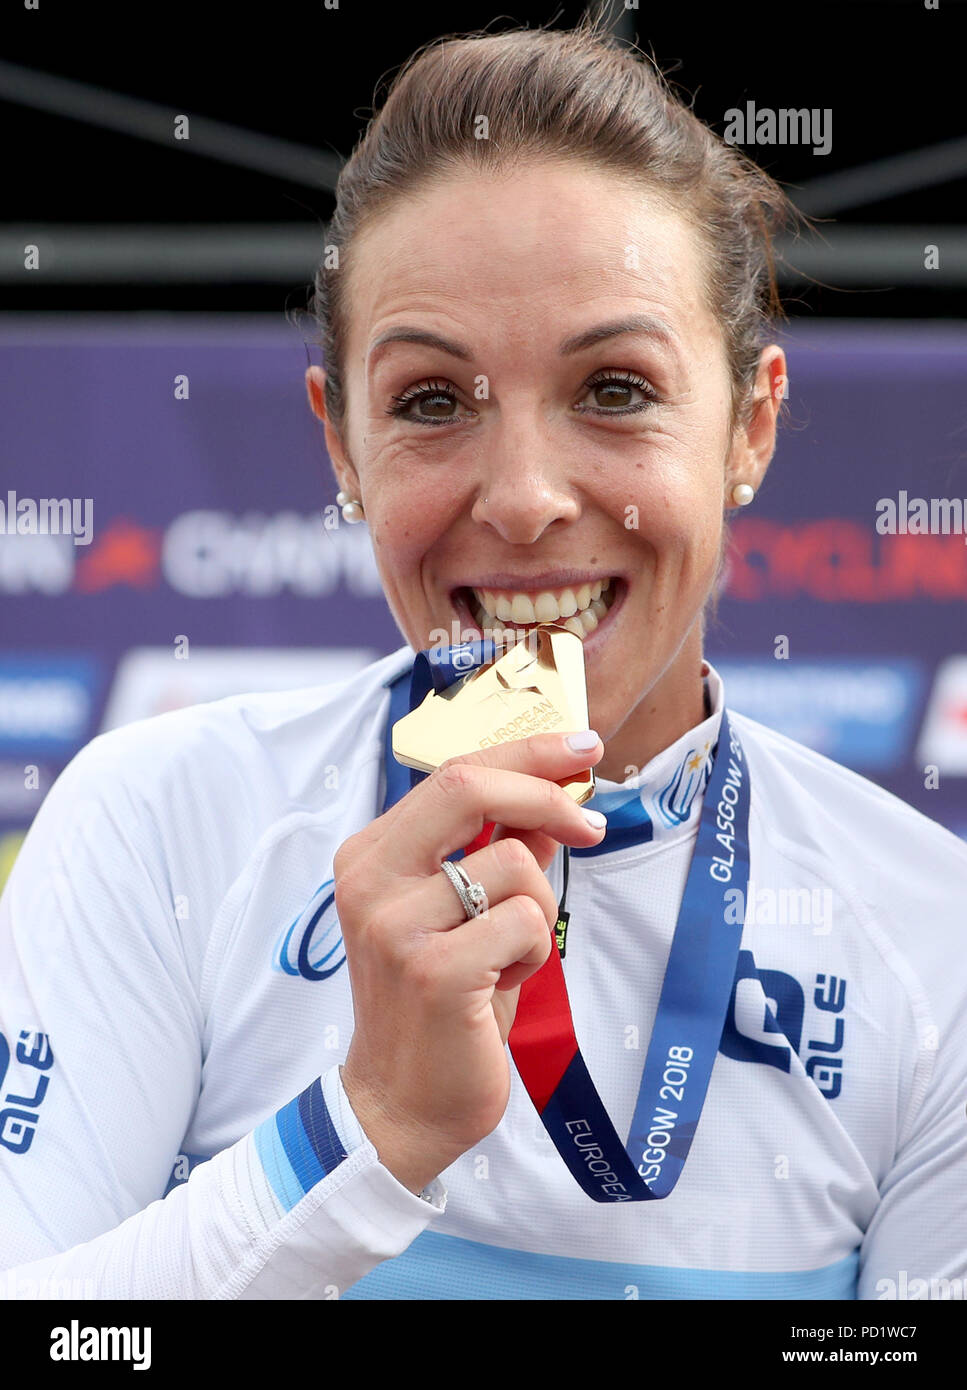 Italy's Marta Bastianelli on the podium after winning the Gold Medal in the Women's 130km Road Race during day four of the 2018 European Championships at the Glasgow Cycling Road Race Course. Stock Photo